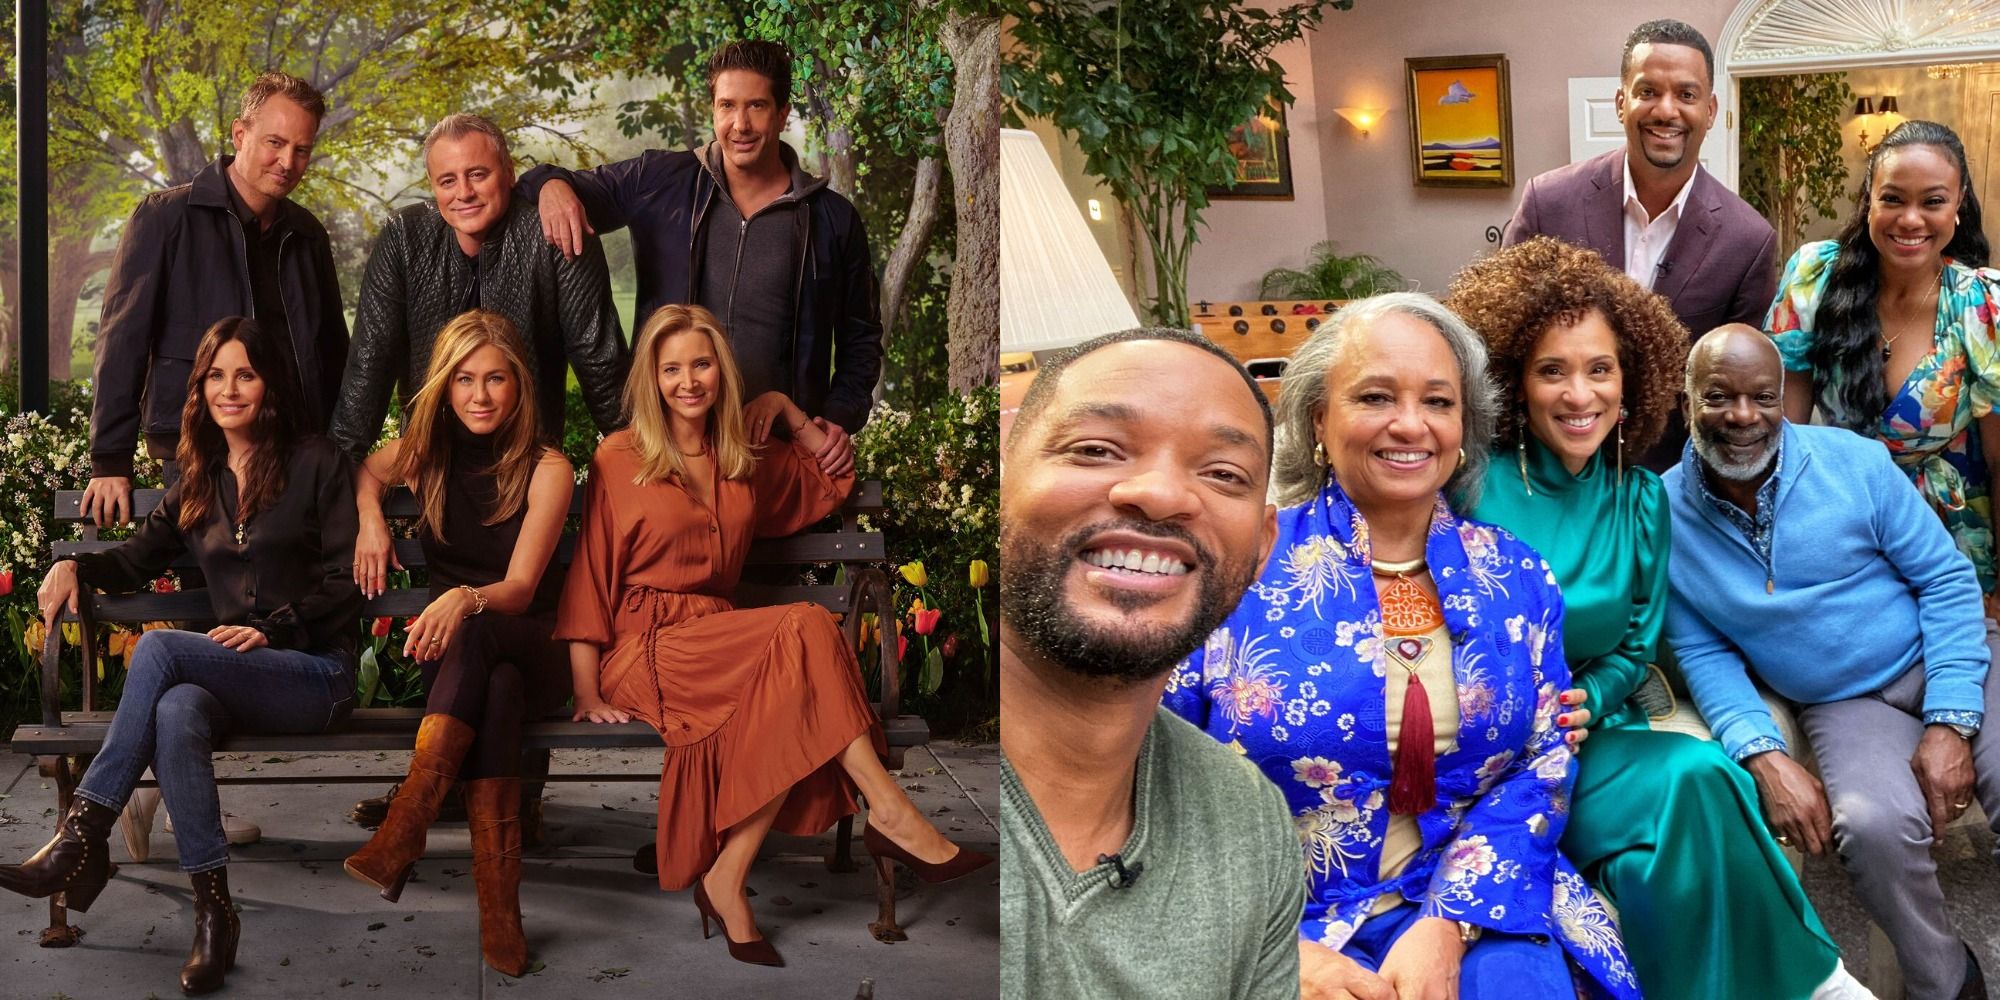 Split image of the Friends and Fresh Prince of Bel Air casts